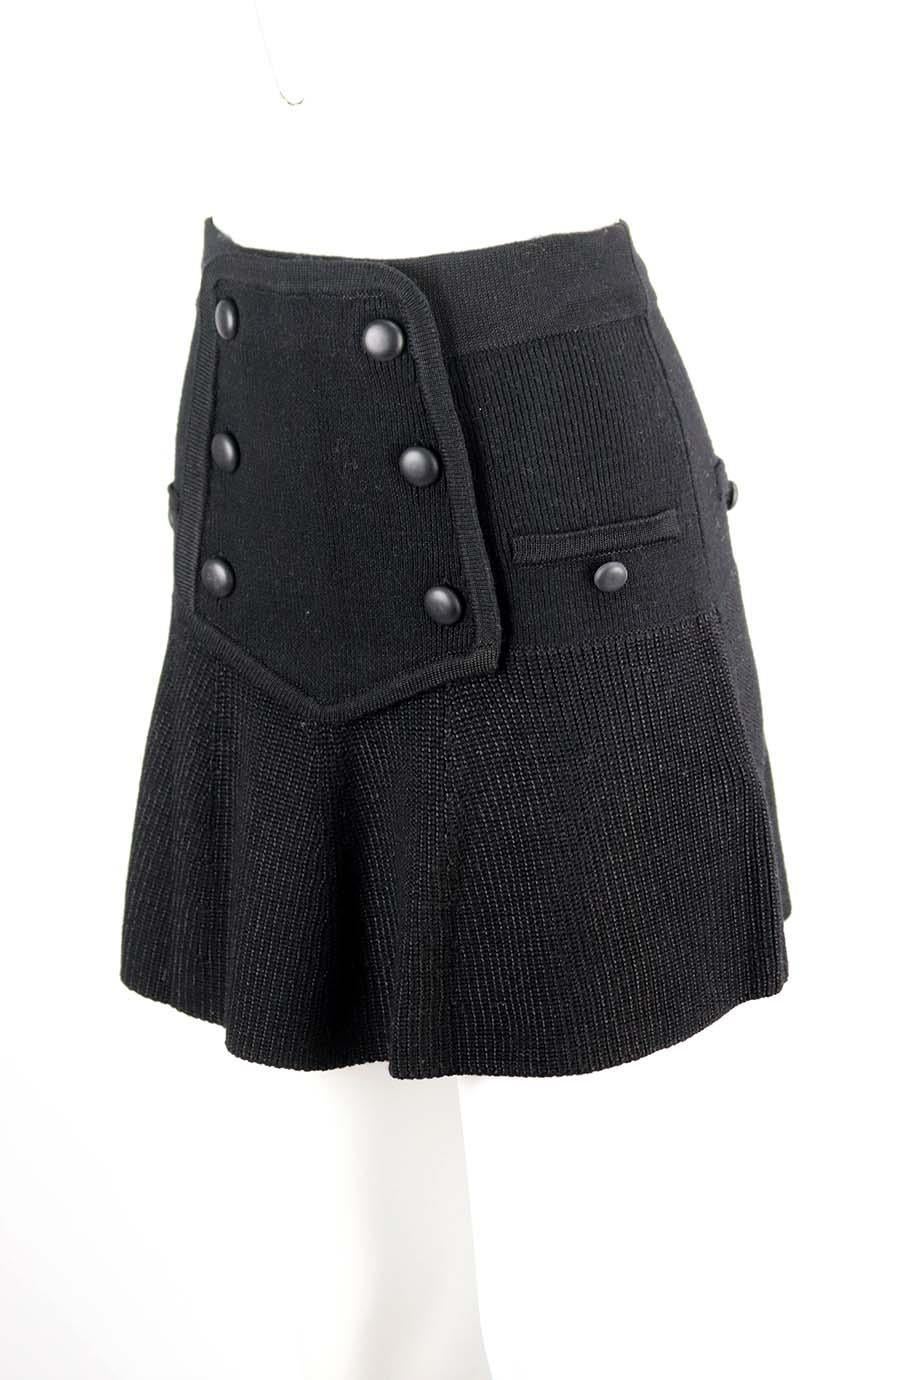 This 'Huxley' skirt by Isabel Marant from the Fall '15 runway collection is knitted from black wool-blend and has been left unlined so it holds its shape beautifully. Black wool-blend. Pull on. 100% Wool. Size: FR 36 (UK 8, US 4, IT 40). Waist